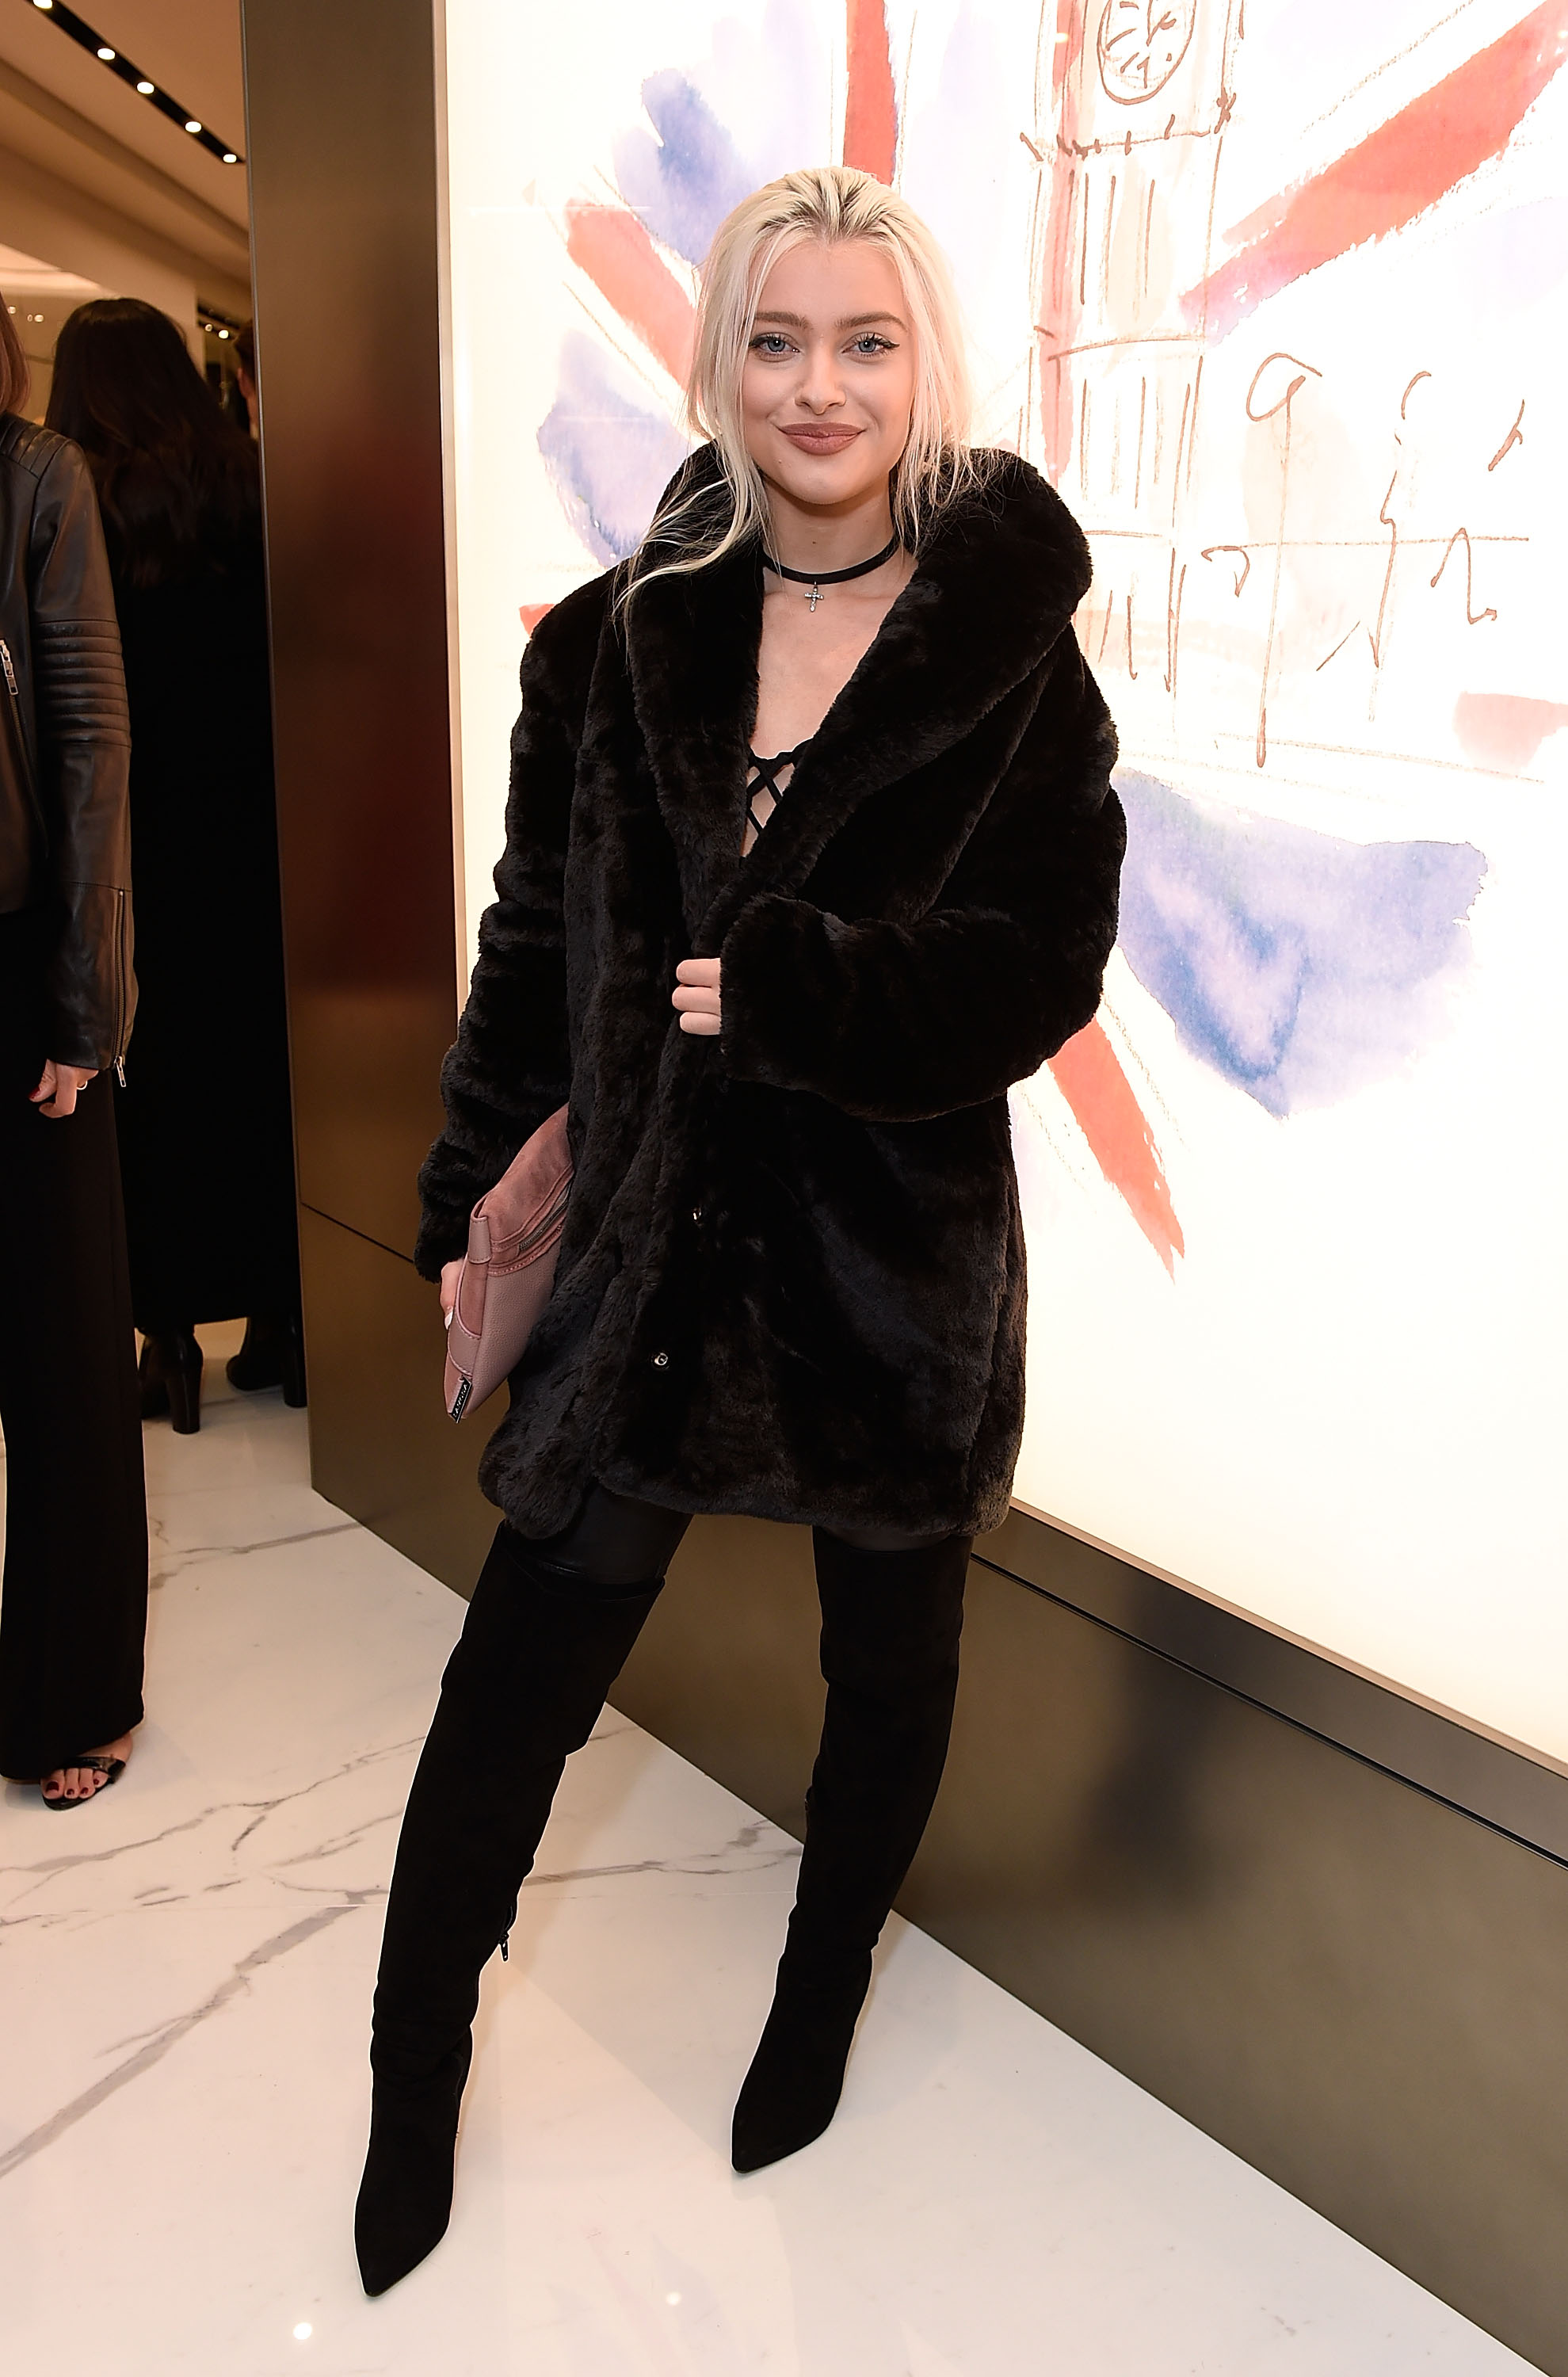 Alice Chater attends the Giuseppe Zanotti London flagship store launch